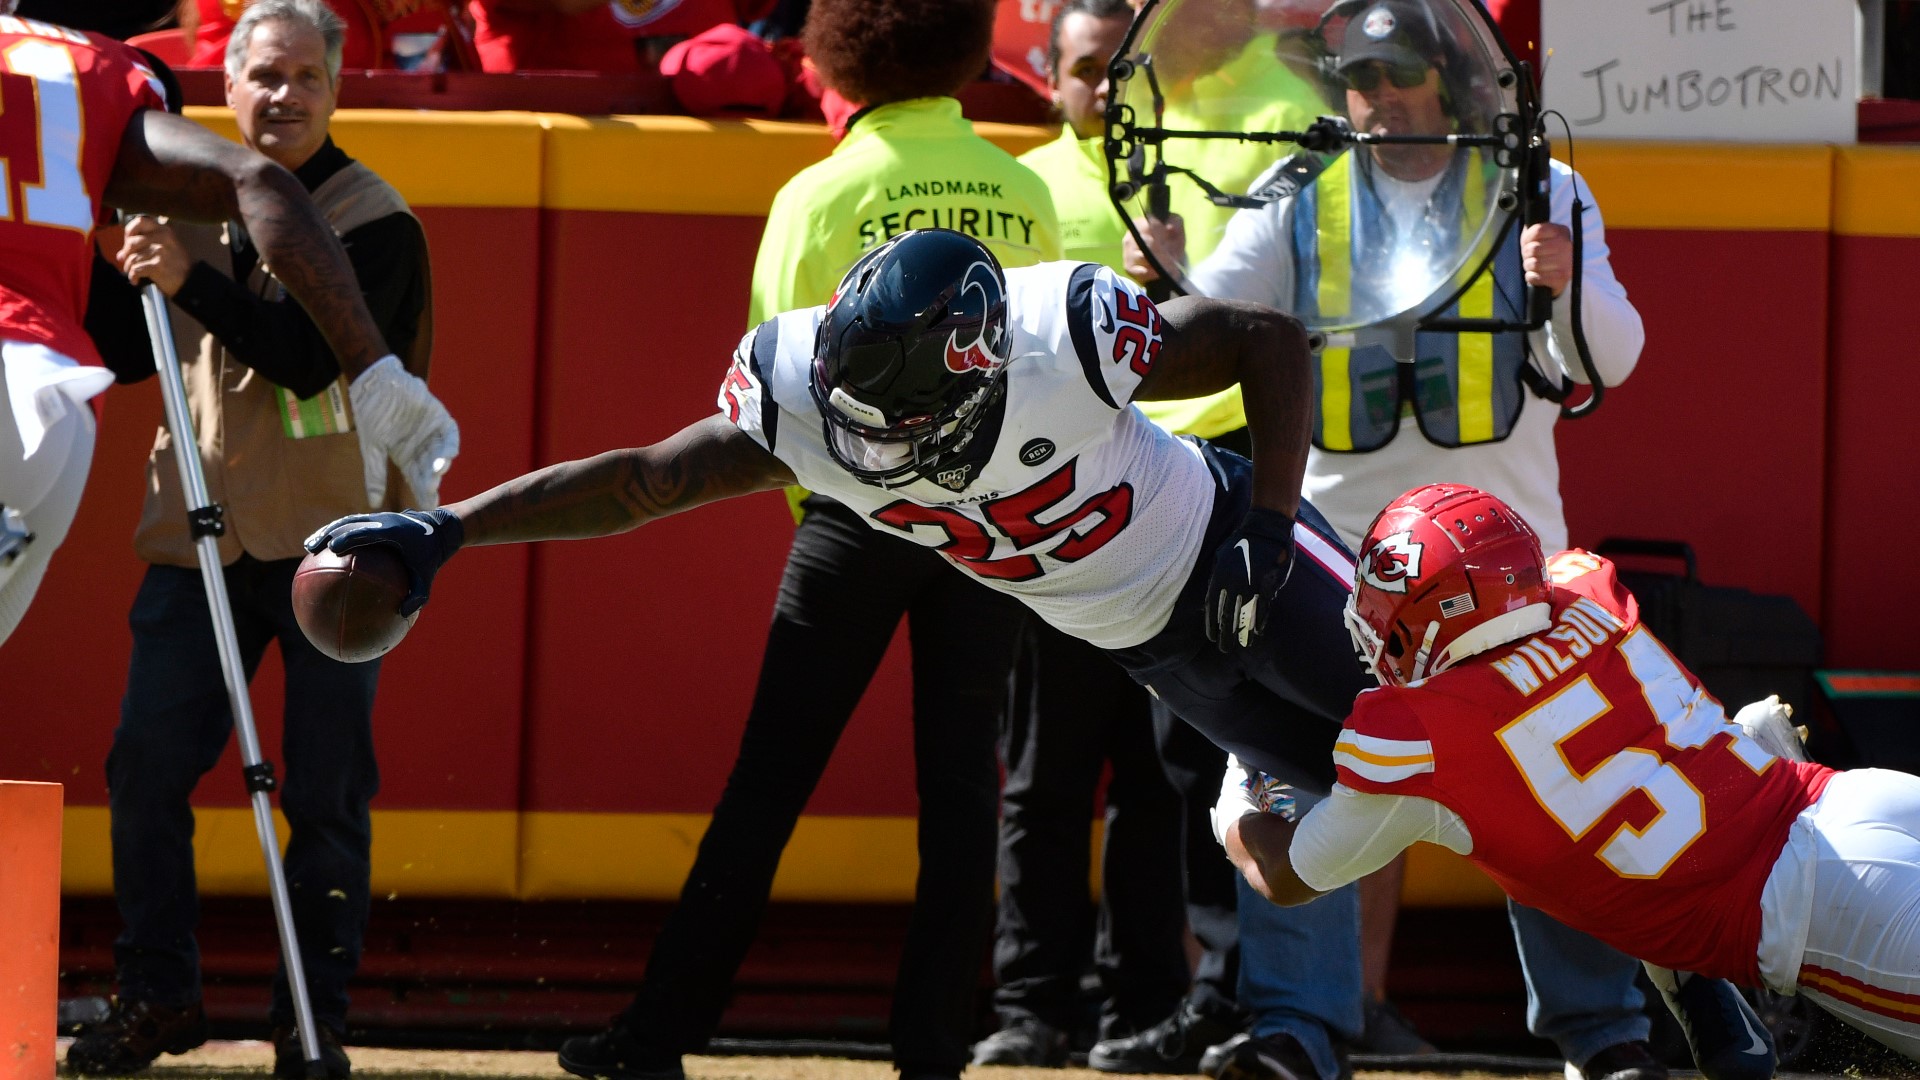 The Texans started slowly, but came back to top the Chiefs in Kansas City on Sunday.